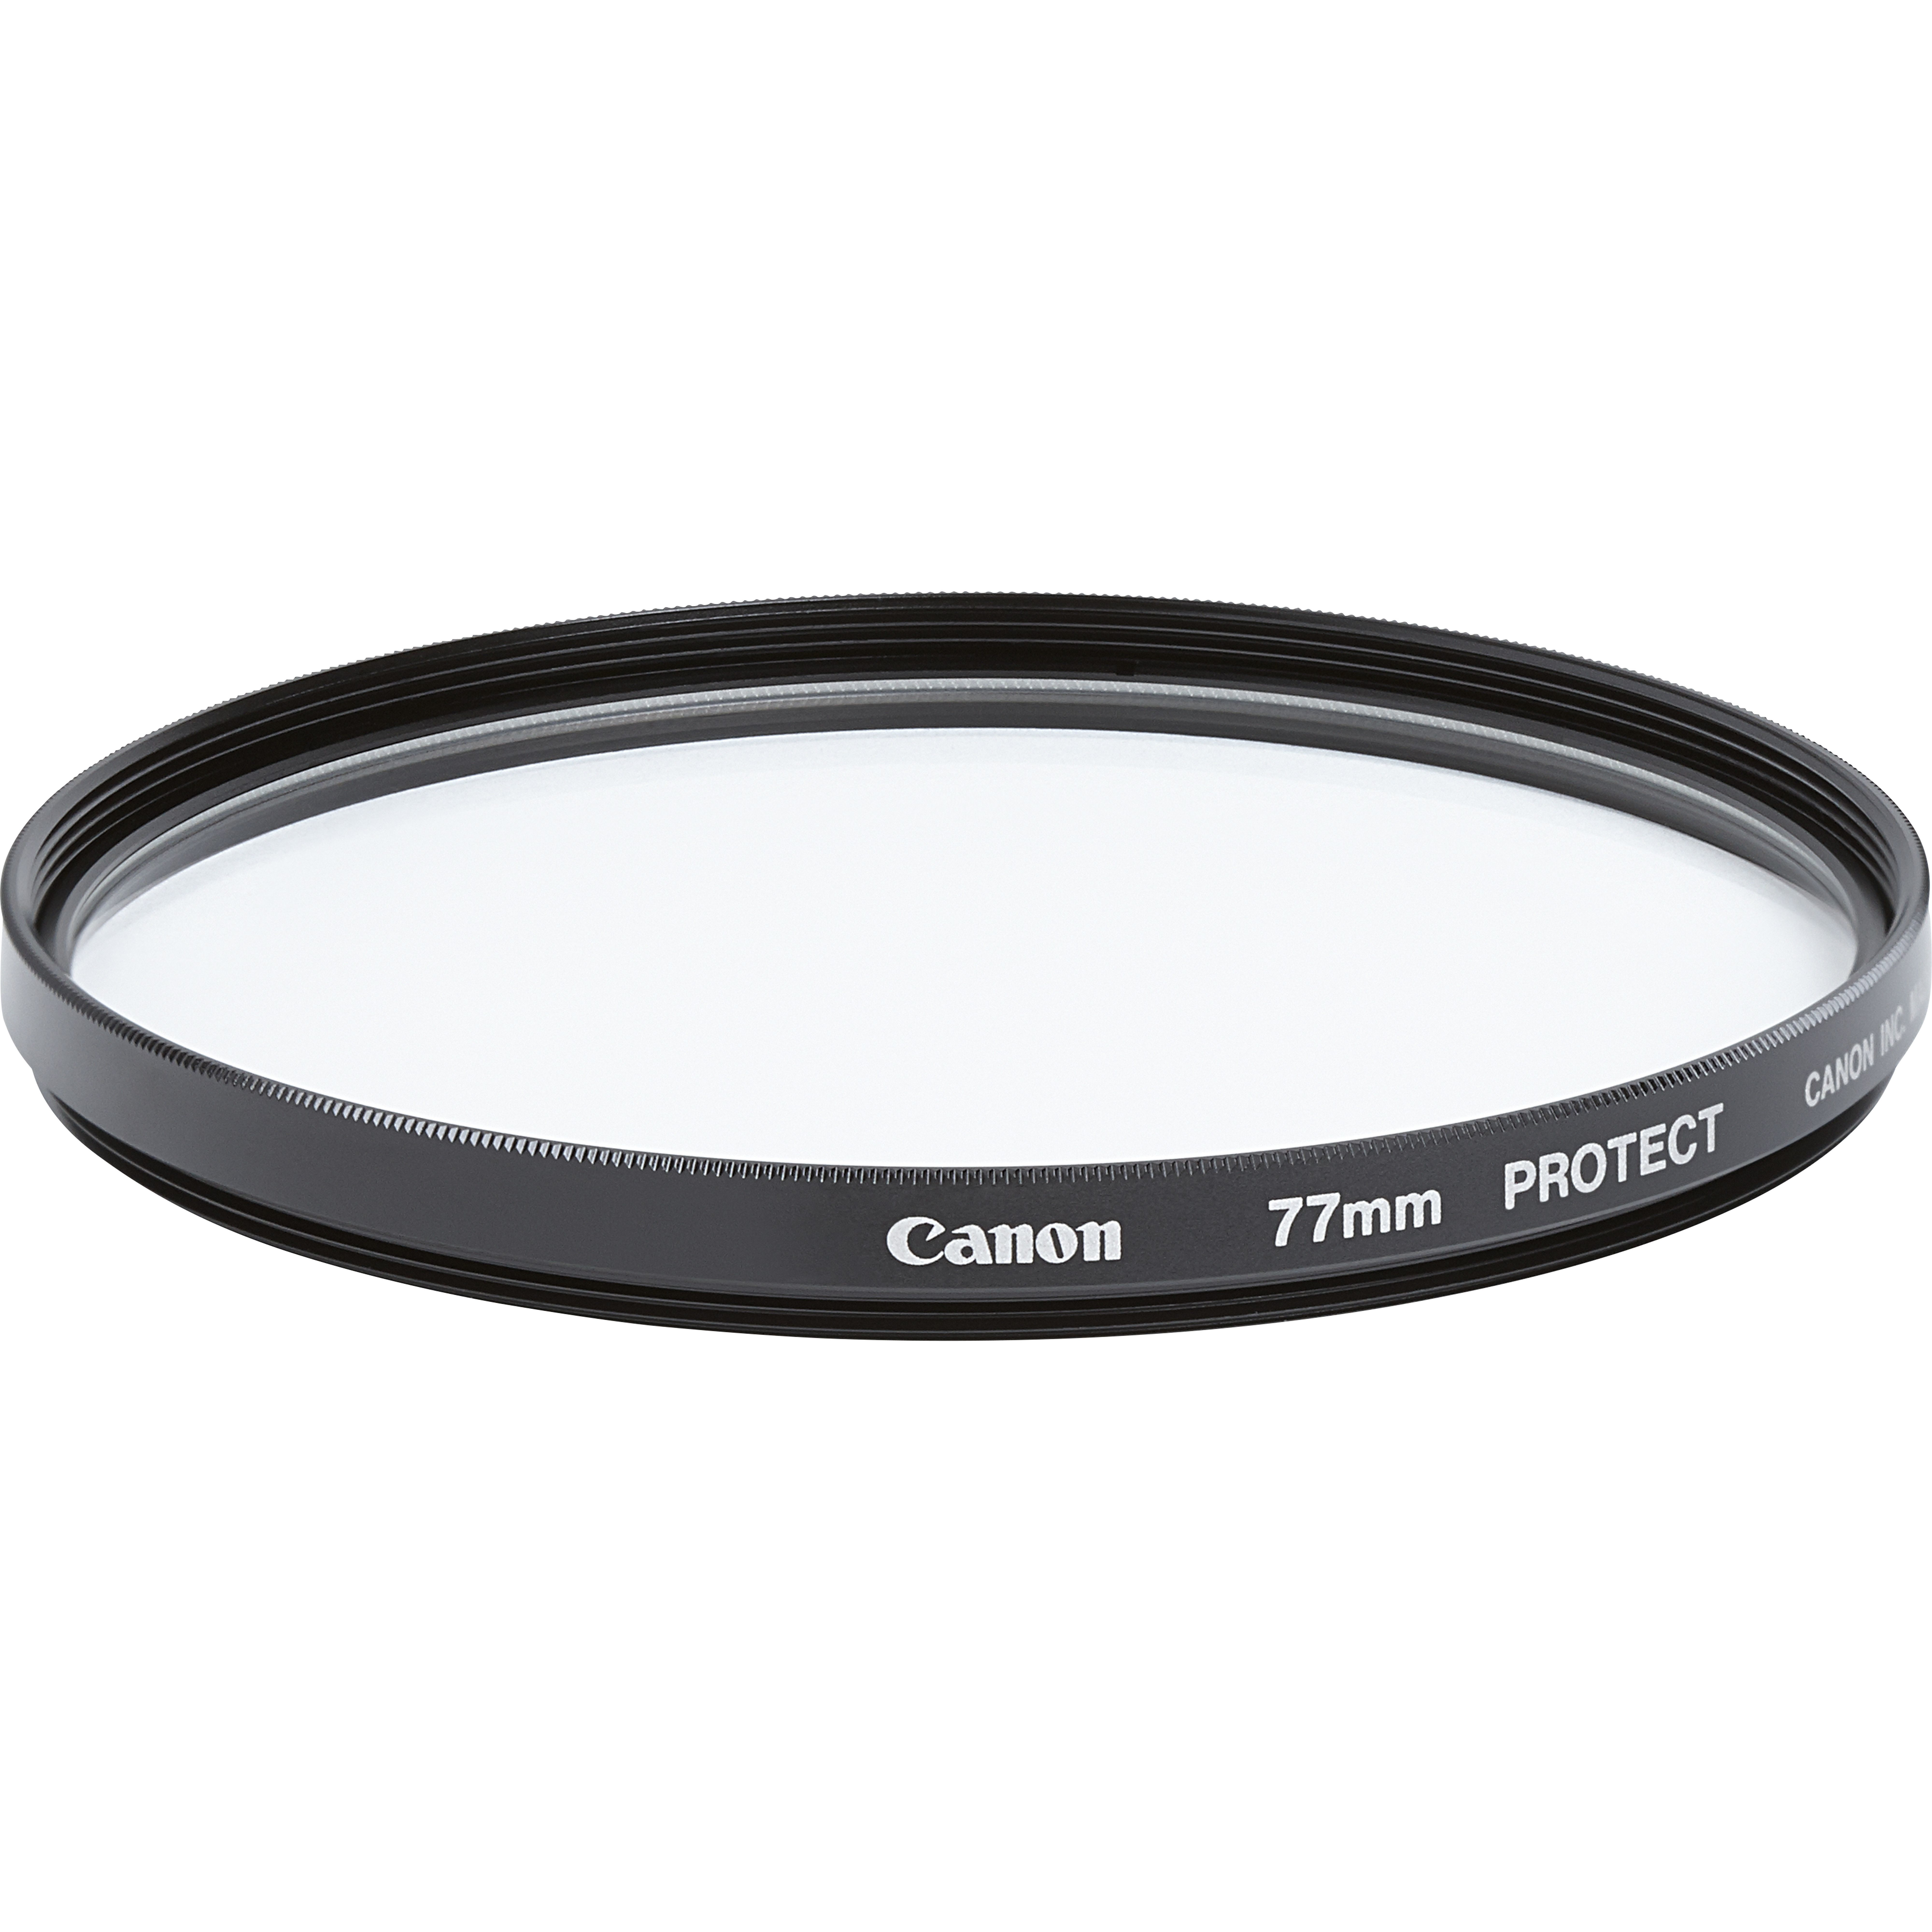 Canon - Filter - protection - 77 mm - for EF, EF-S